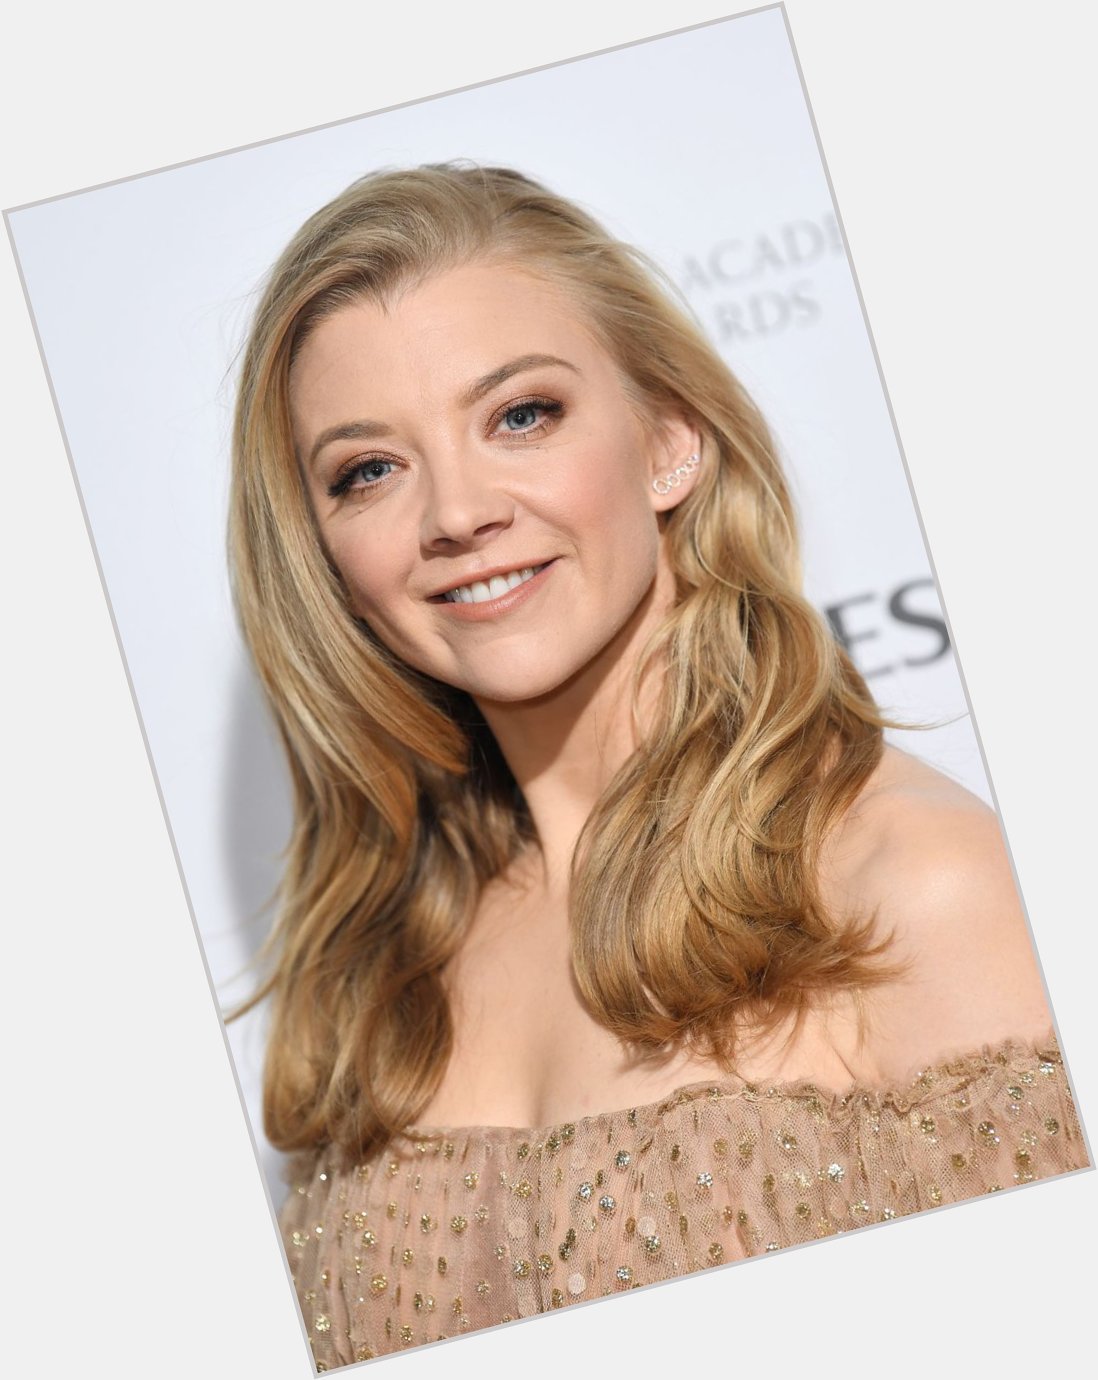 Happy 40th Birthday Natalie Dormer - Margaery Tyrell from Game of Thrones 